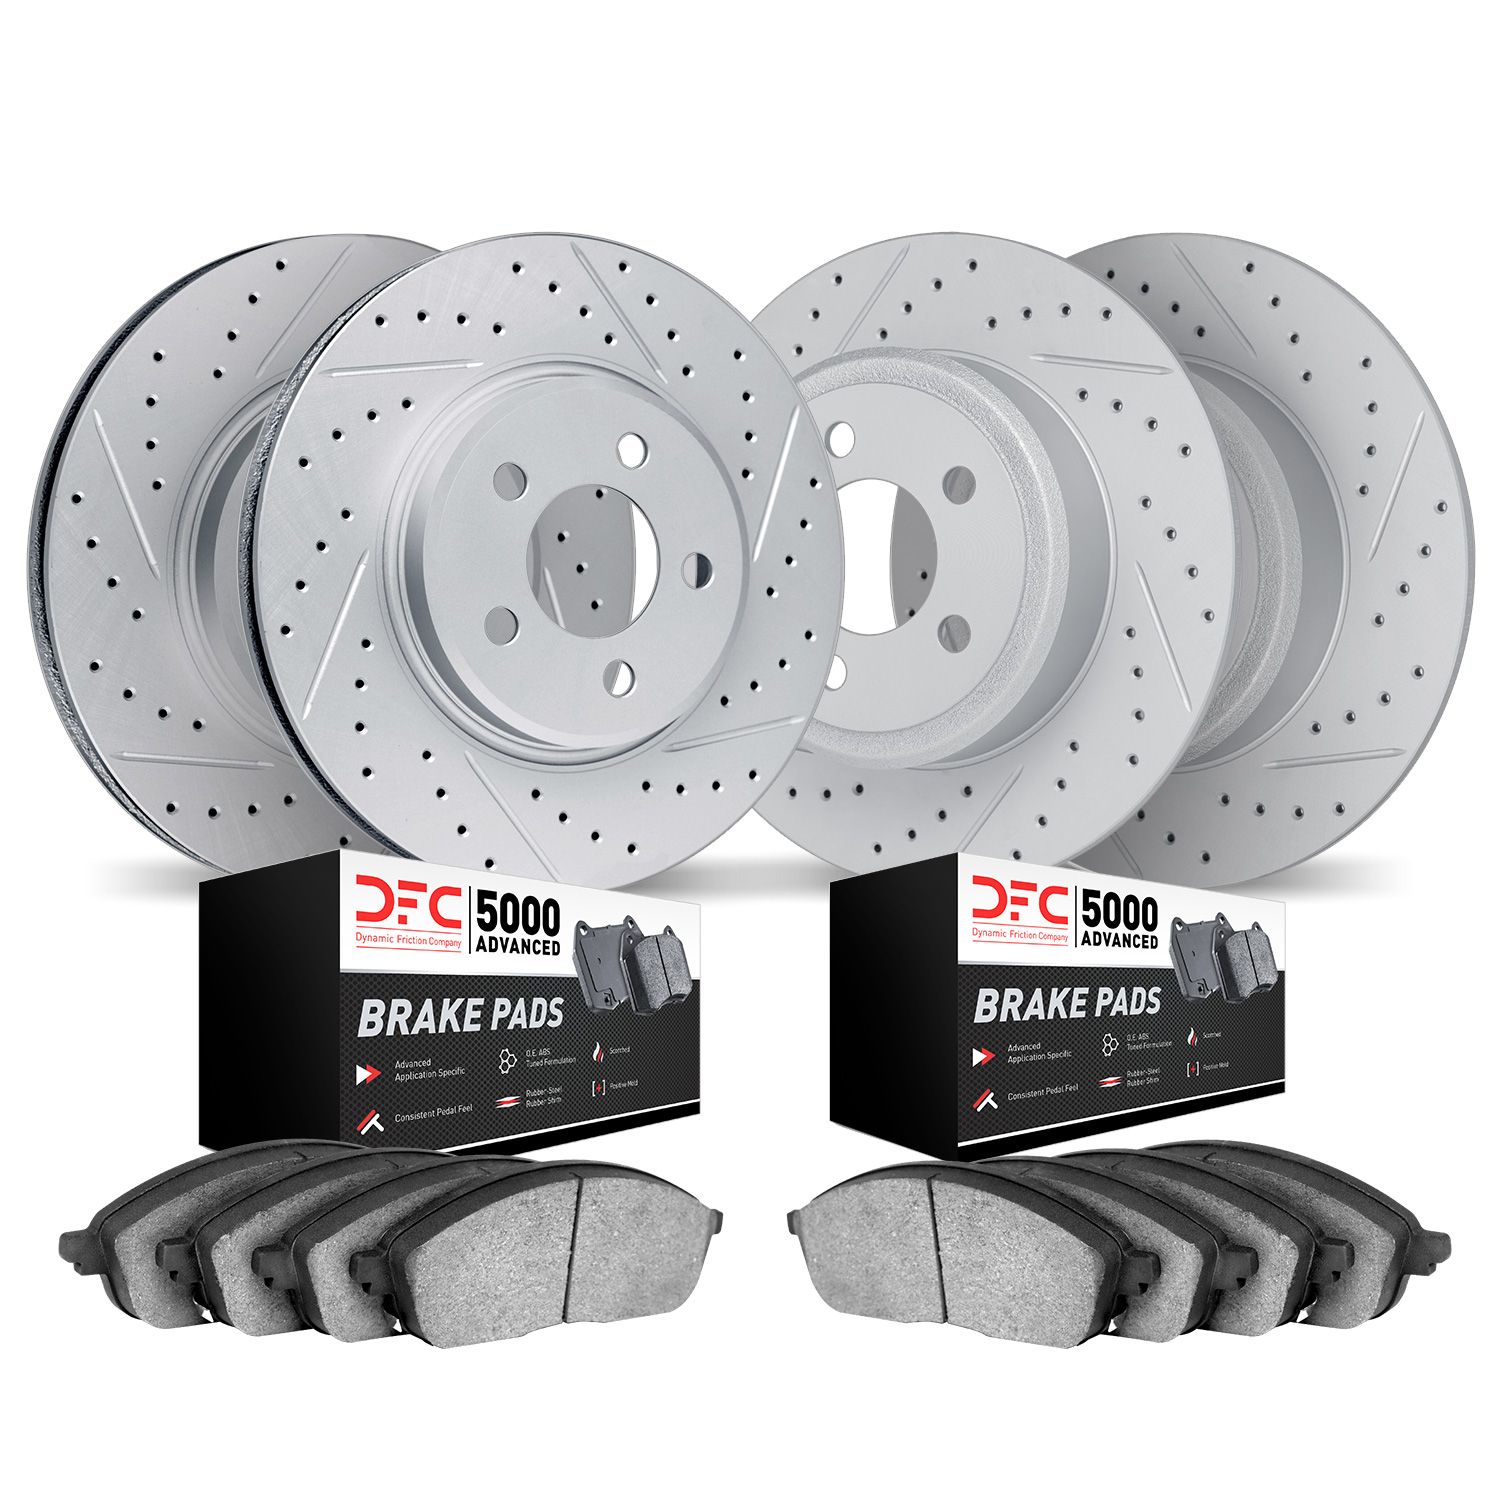 2504-67056 Geoperformance Drilled/Slotted Rotors w/5000 Advanced Brake Pads Kit, 2000-2001 Infiniti/Nissan, Position: Front and